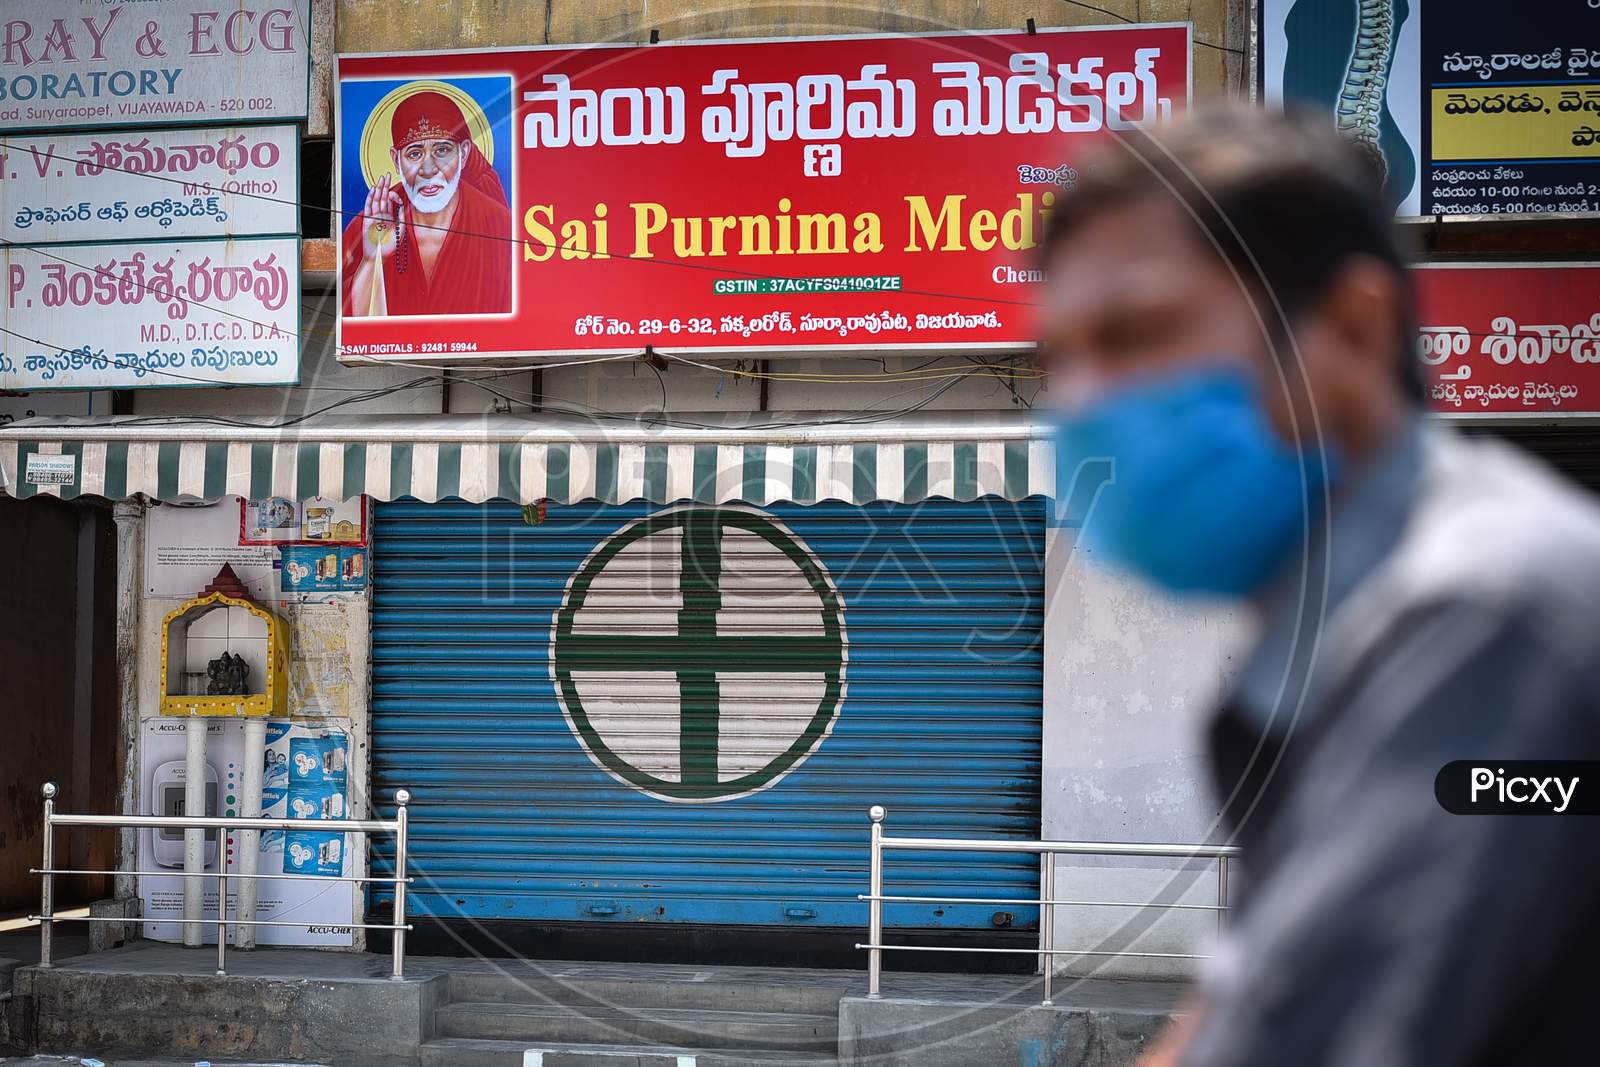 A Closed Medical Store Is Seen During The Nationwide Lockdown Imposed In The Wake Of Coronavirus Pandemic, In Vijayawada.